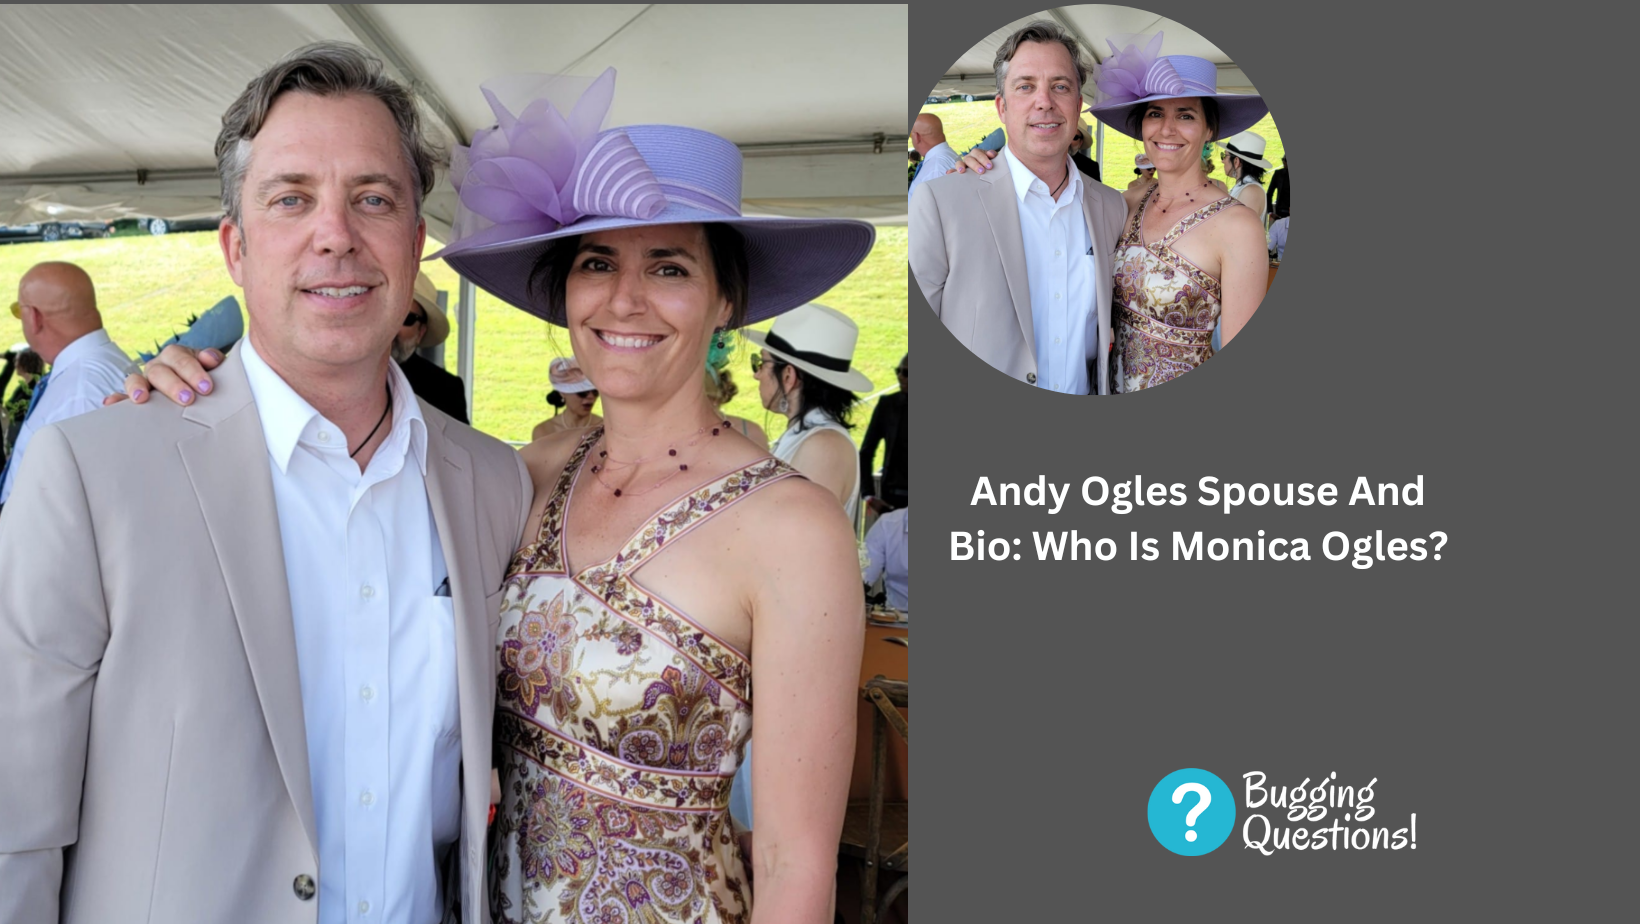 Andy Ogles Spouse And Bio: Who Is Monica Ogles?